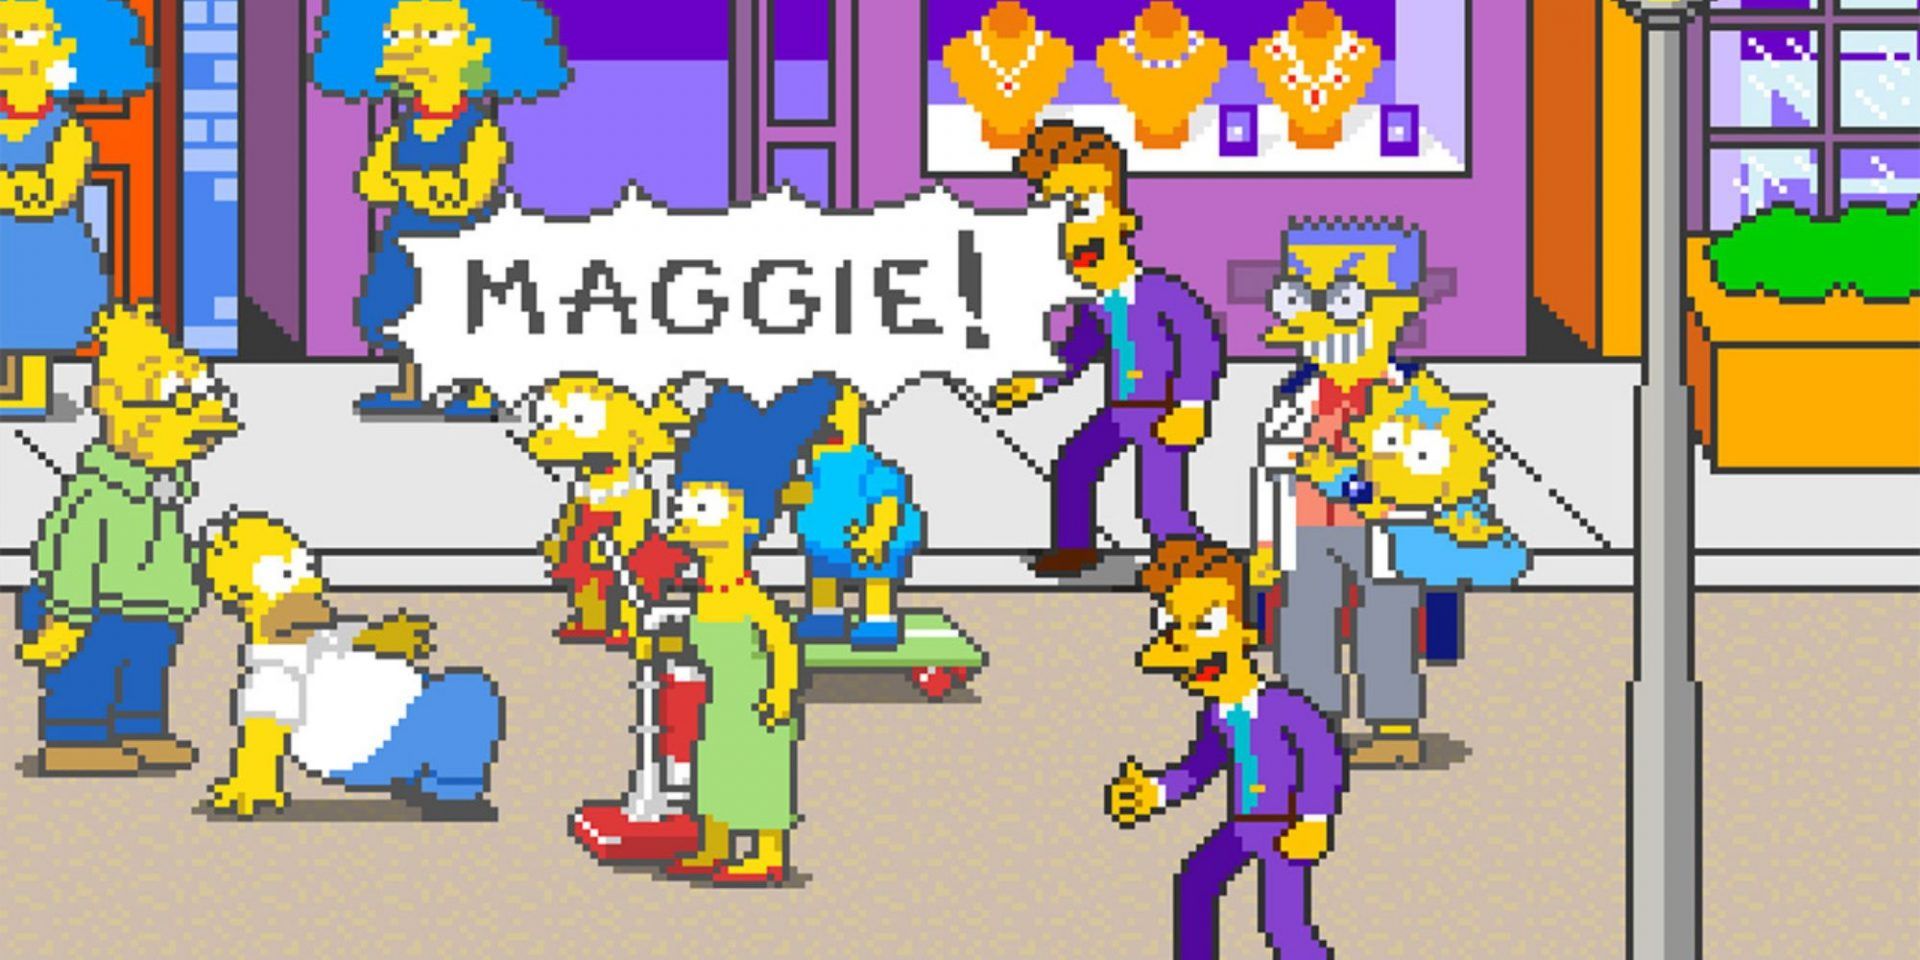 The Simpsons family call out Maggie's name as she's kidnapped by Mr. Smithers